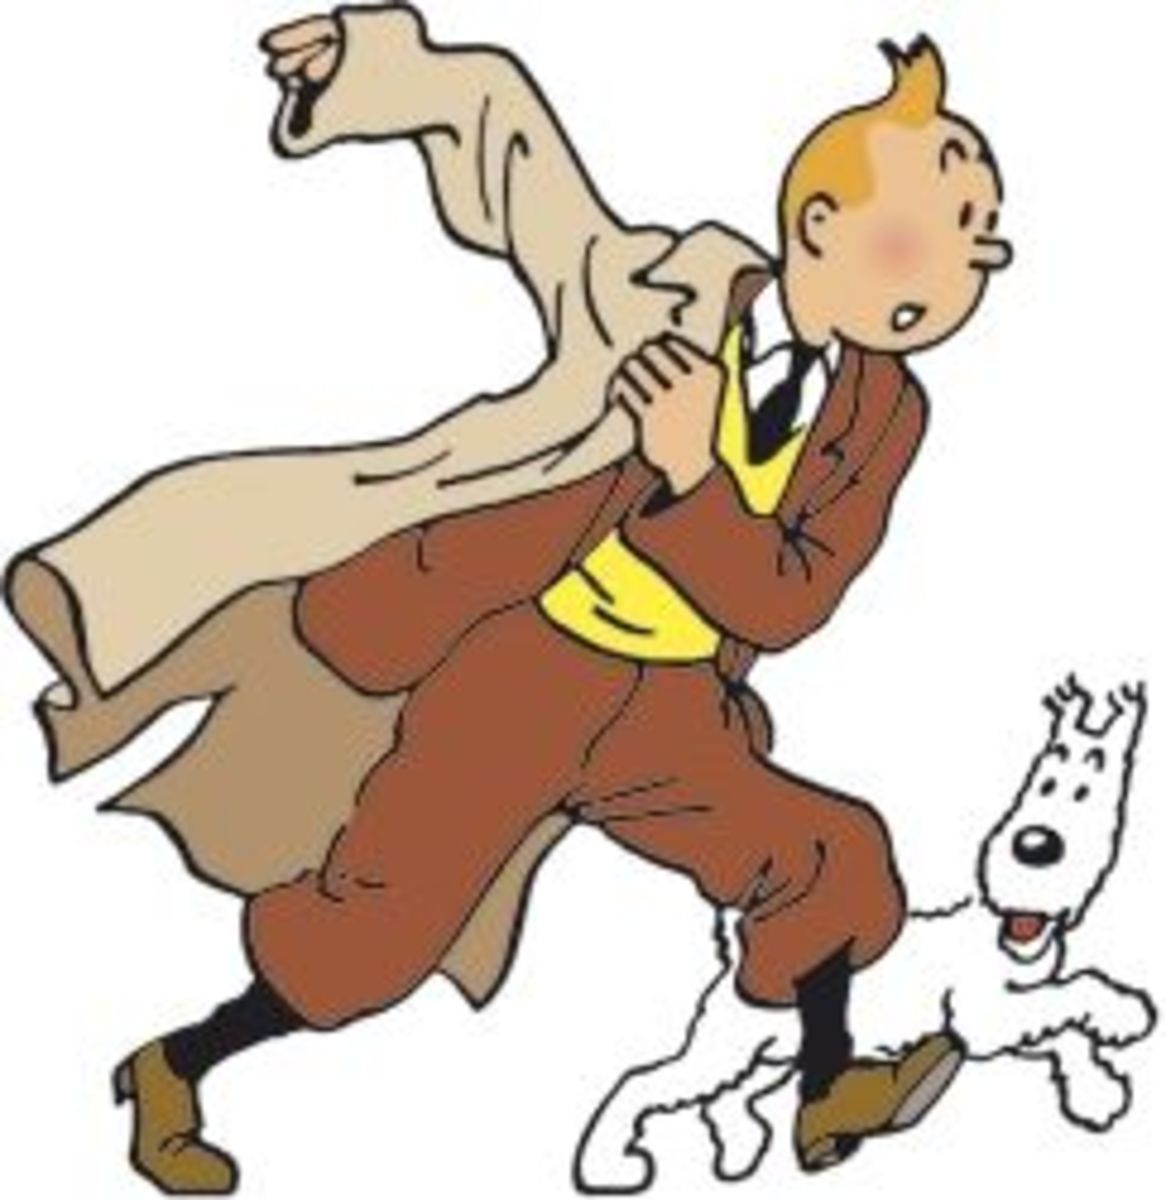 The Tintin Character Guide